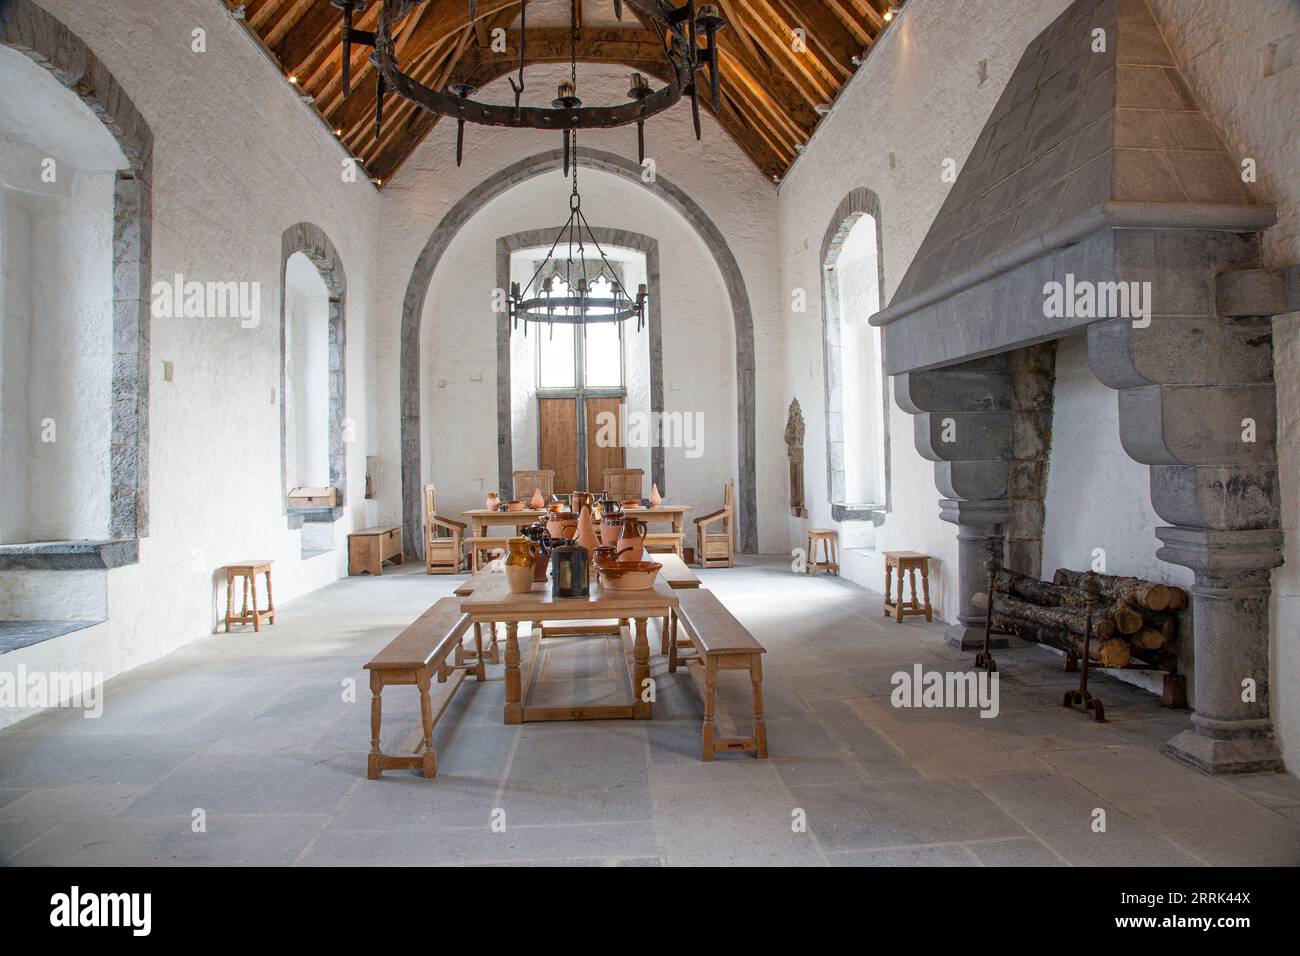 Medieval Castle Banqueting Hall Stock Photo